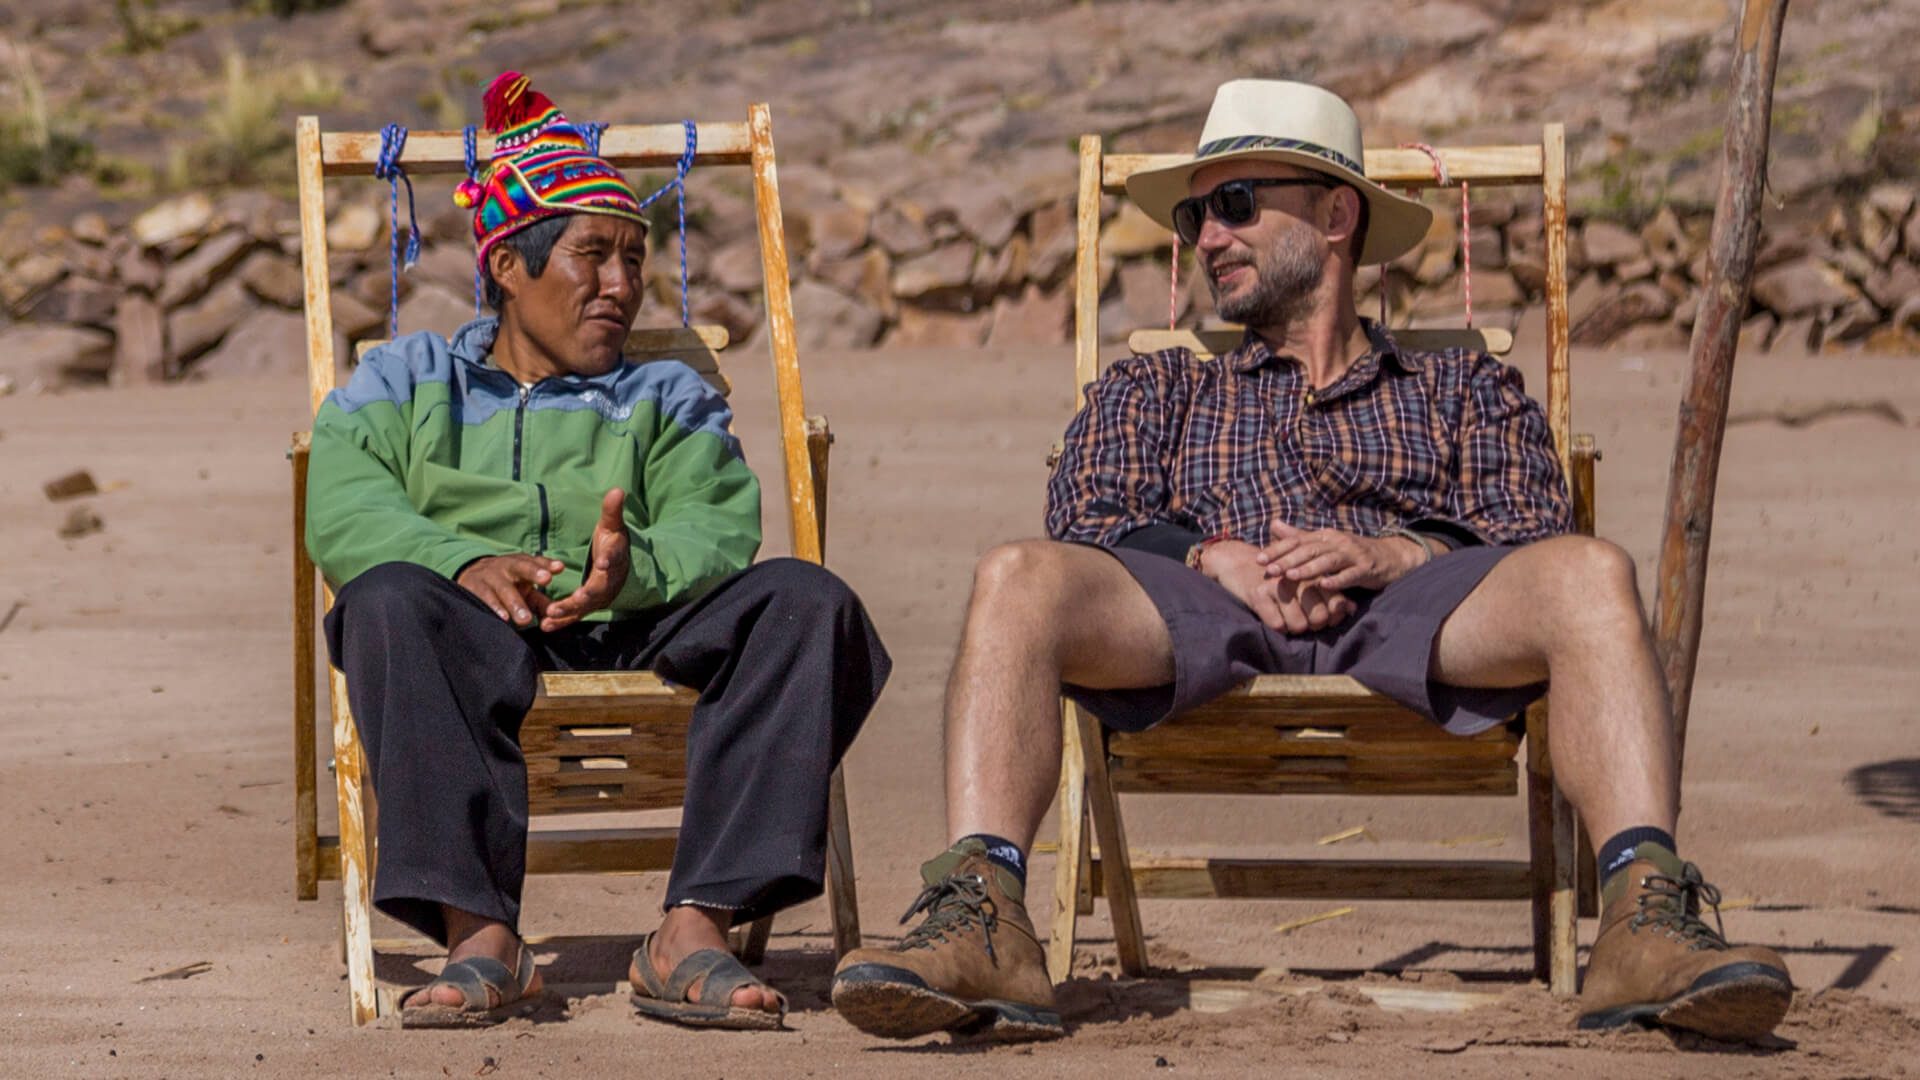 Celso and Alex talking while taking the sun at the beach in Taquile island, Titicaca - RESPONSible Travel Peru